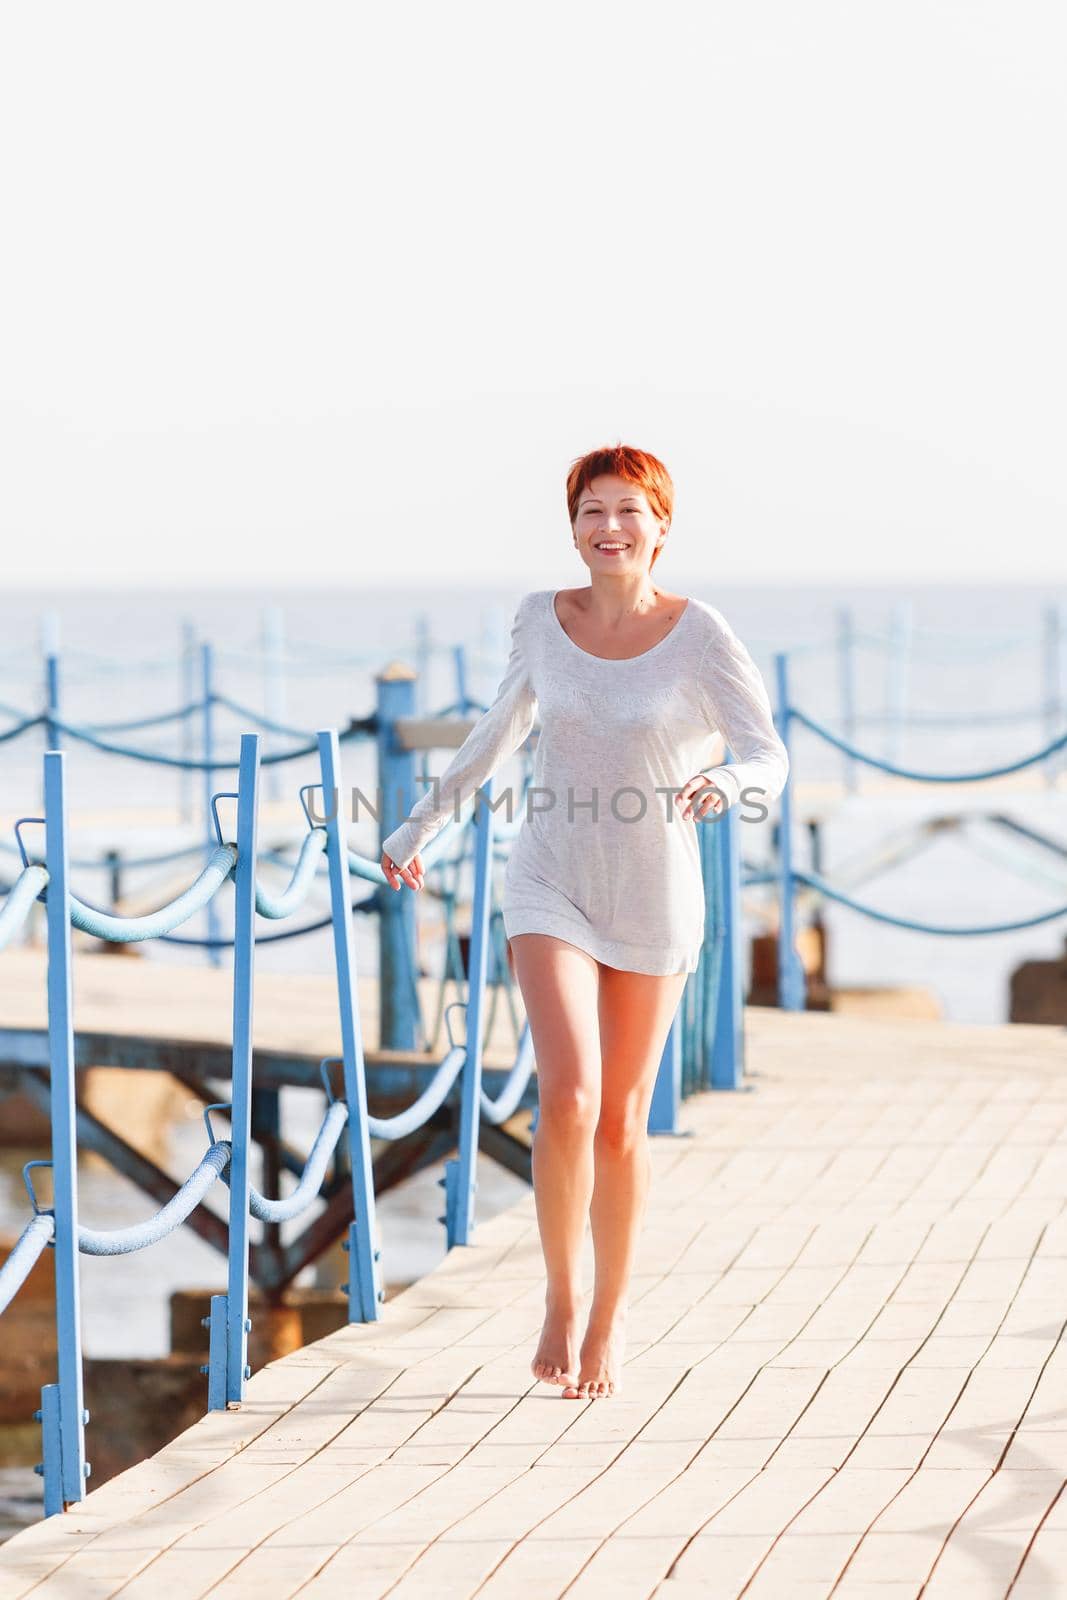 Wide smiling young woman with red short hair cut running on wooden pier. Coastal morning. Natural beauty. Happiness and power of youth.